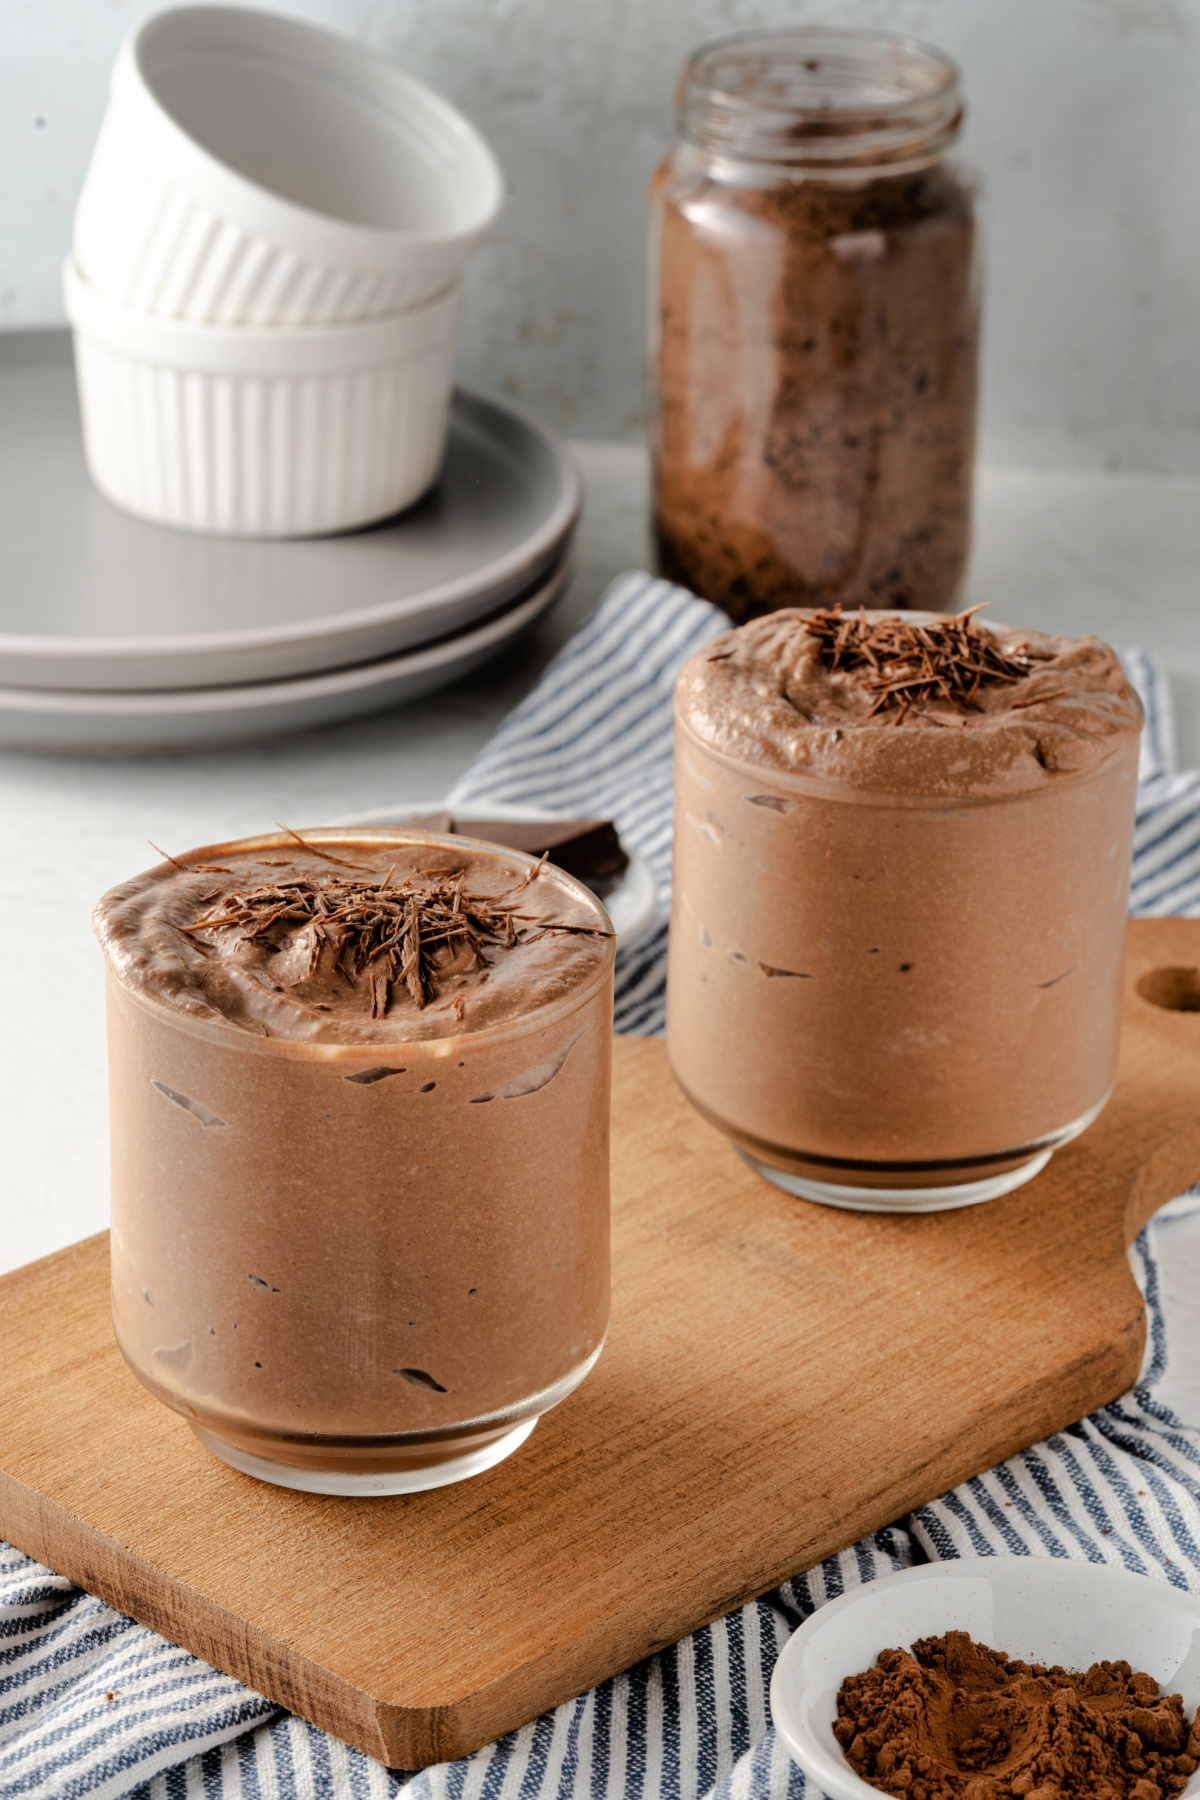 low carb keto chocolate mousse can be enjoyed as part of a low carb diet